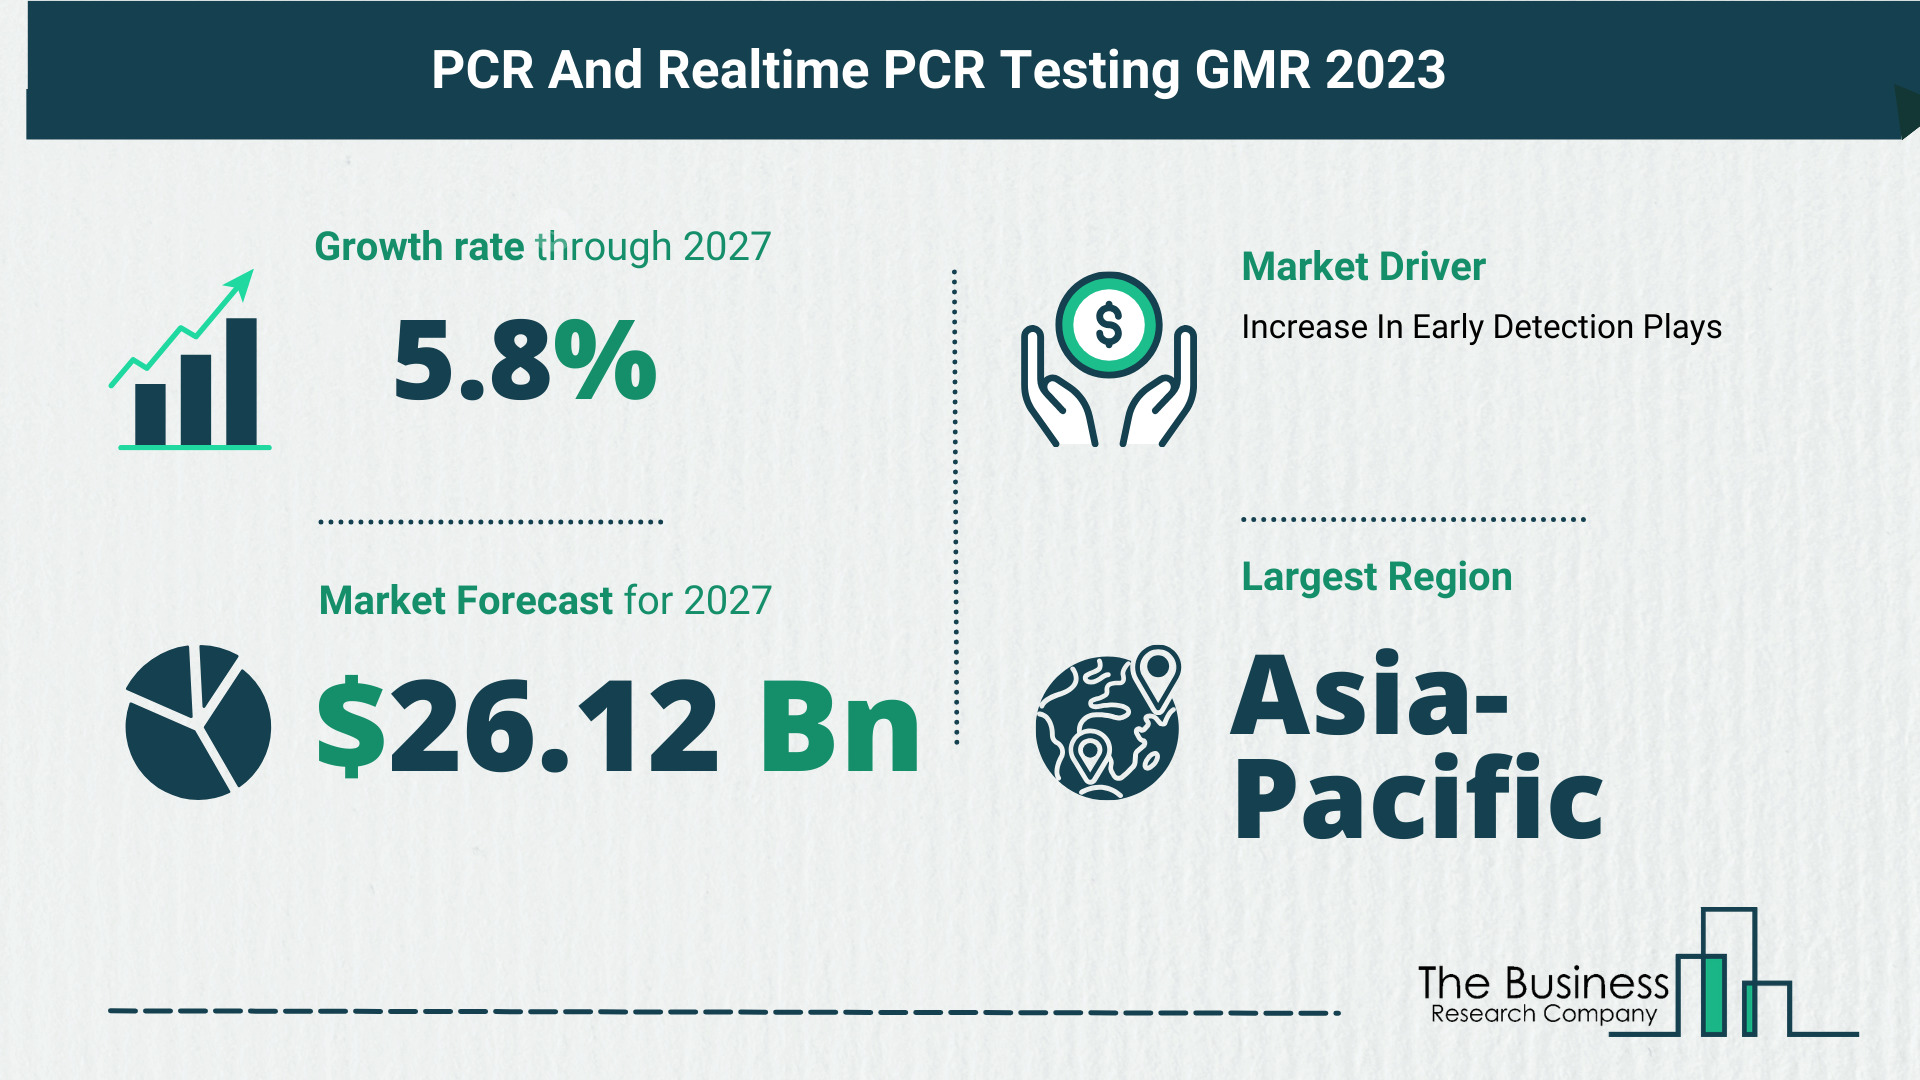 Global PCR And Realtime PCR Testing Market